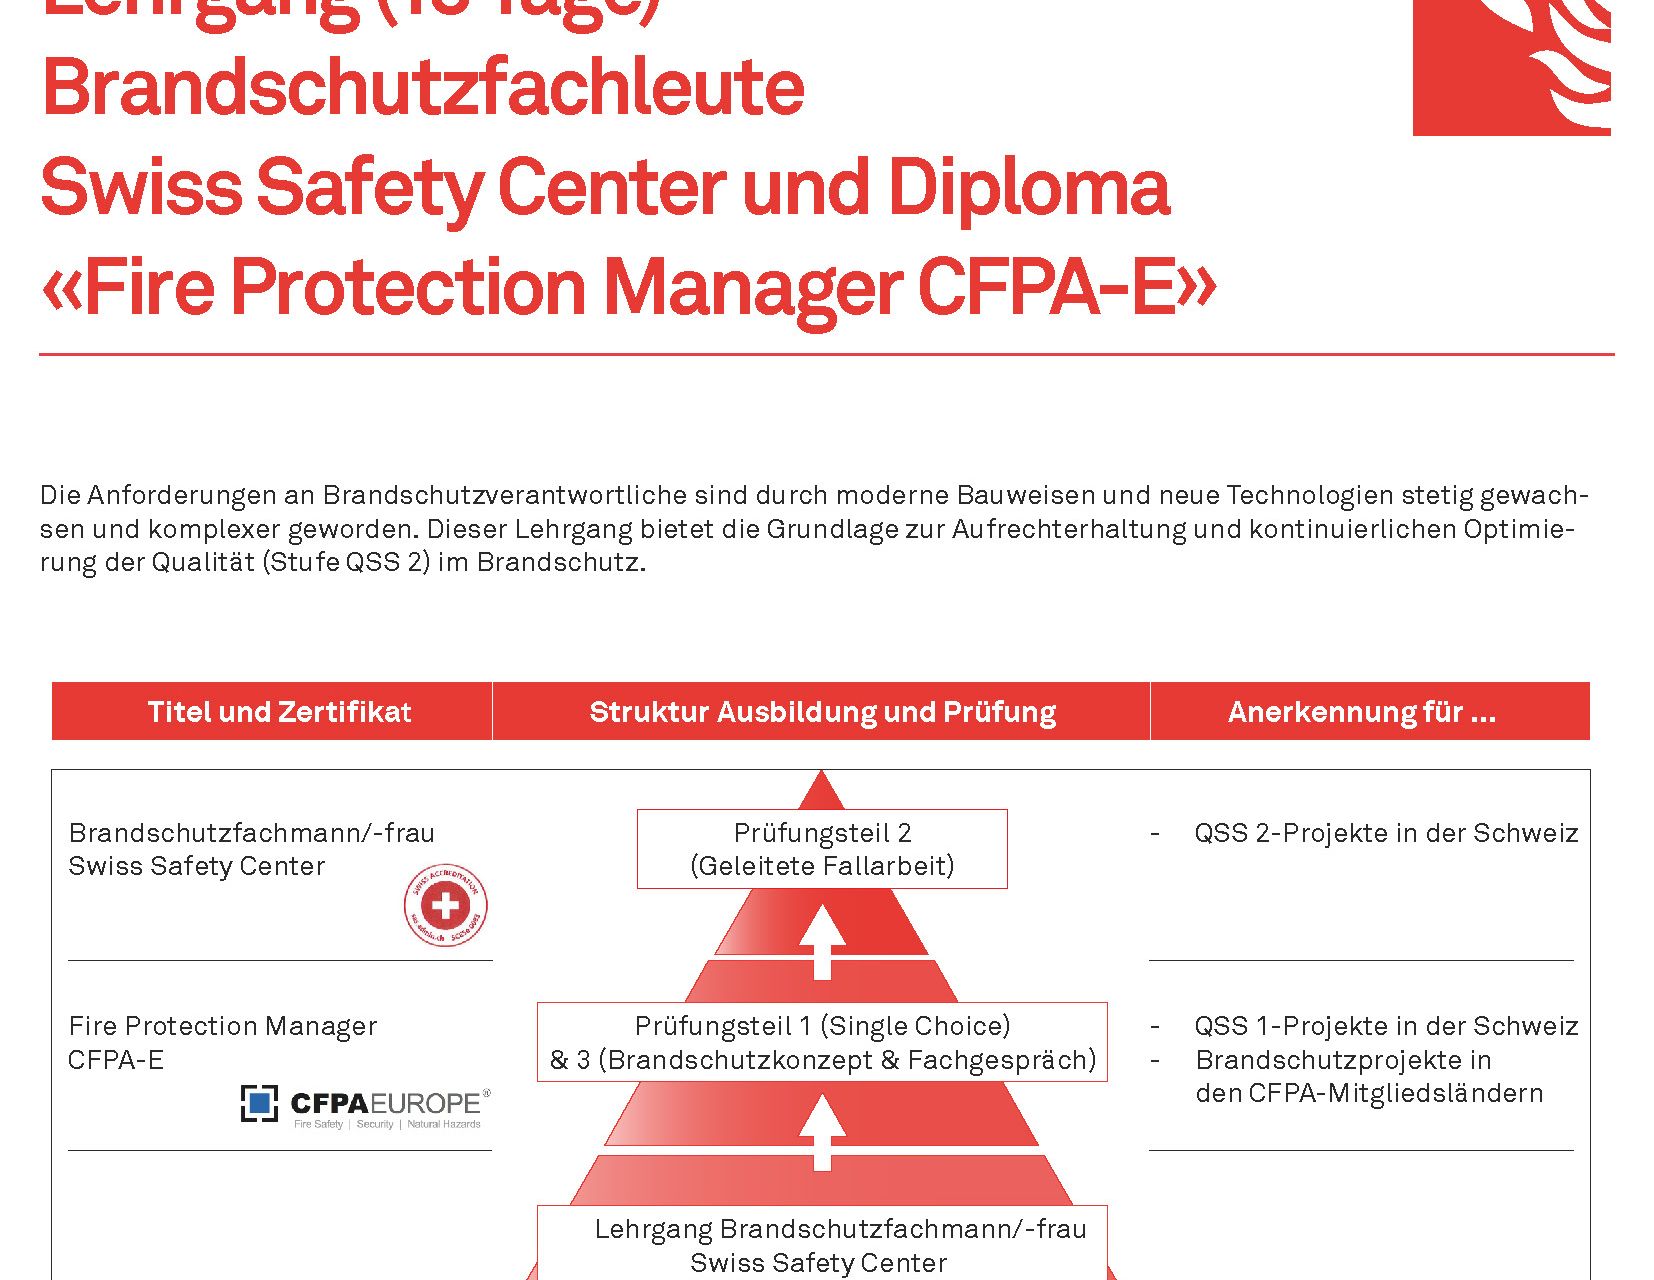 Brandschutzfachleute Swiss Safety Center und Diploma 'Fire Protection Manager CFPA-E' - 21.12.02d